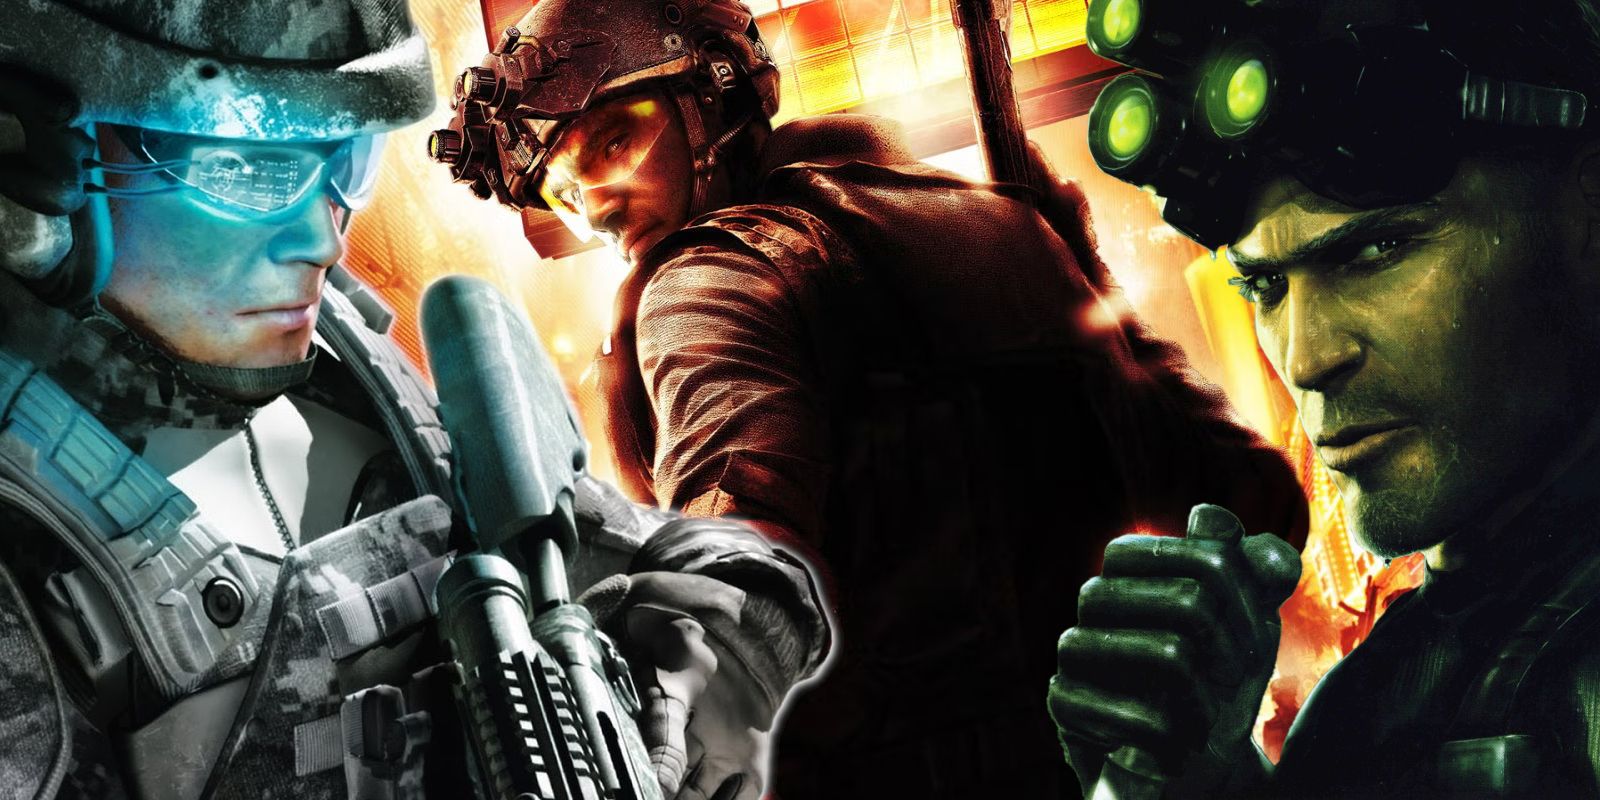 Three characters from the Tom Clancy series overlaid into one image. Scott Mitchell from Ghost Recon: Advanced Warfighter, Logan Keller from Rainbow Six: Vegas, and Sam Fisher from Splinter Cell.